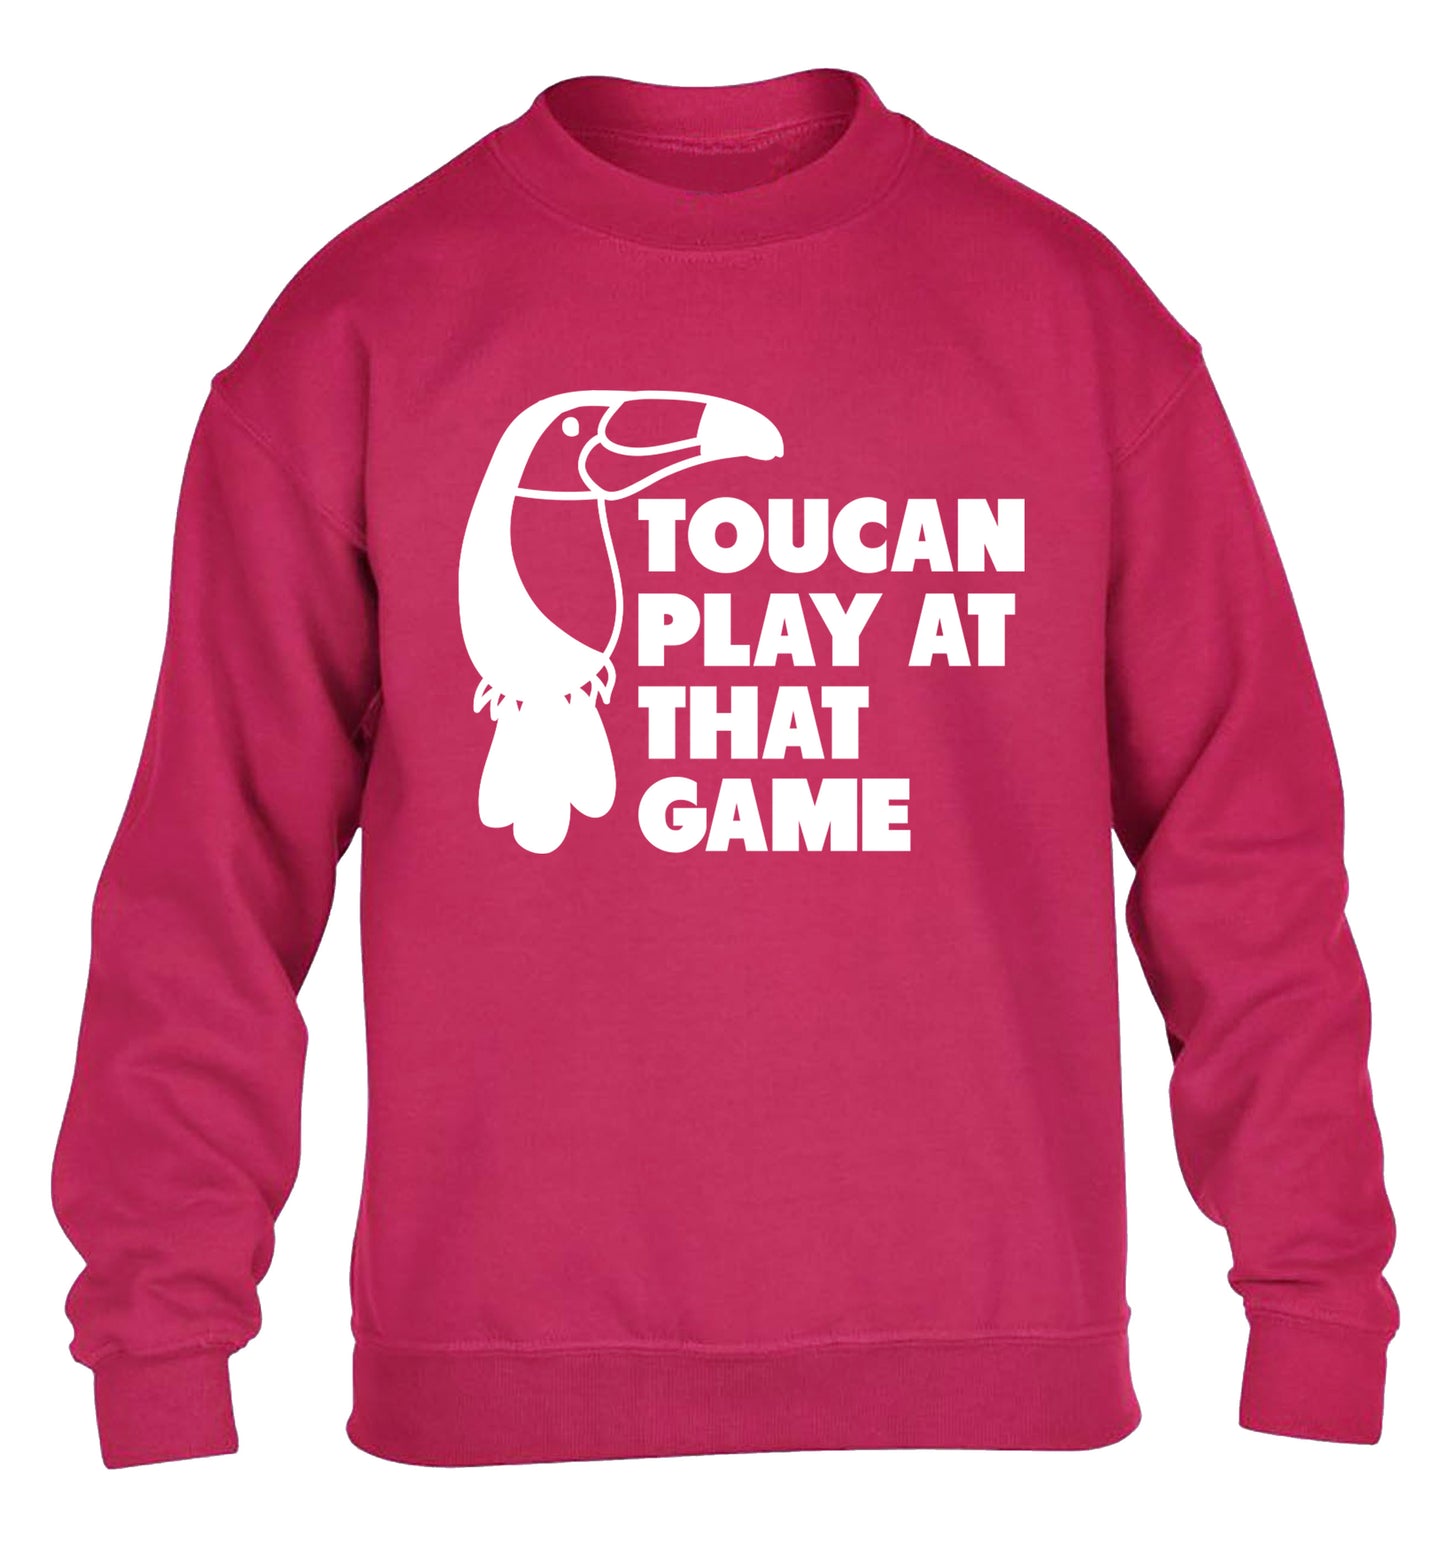 Toucan play at that game children's pink sweater 12-13 Years